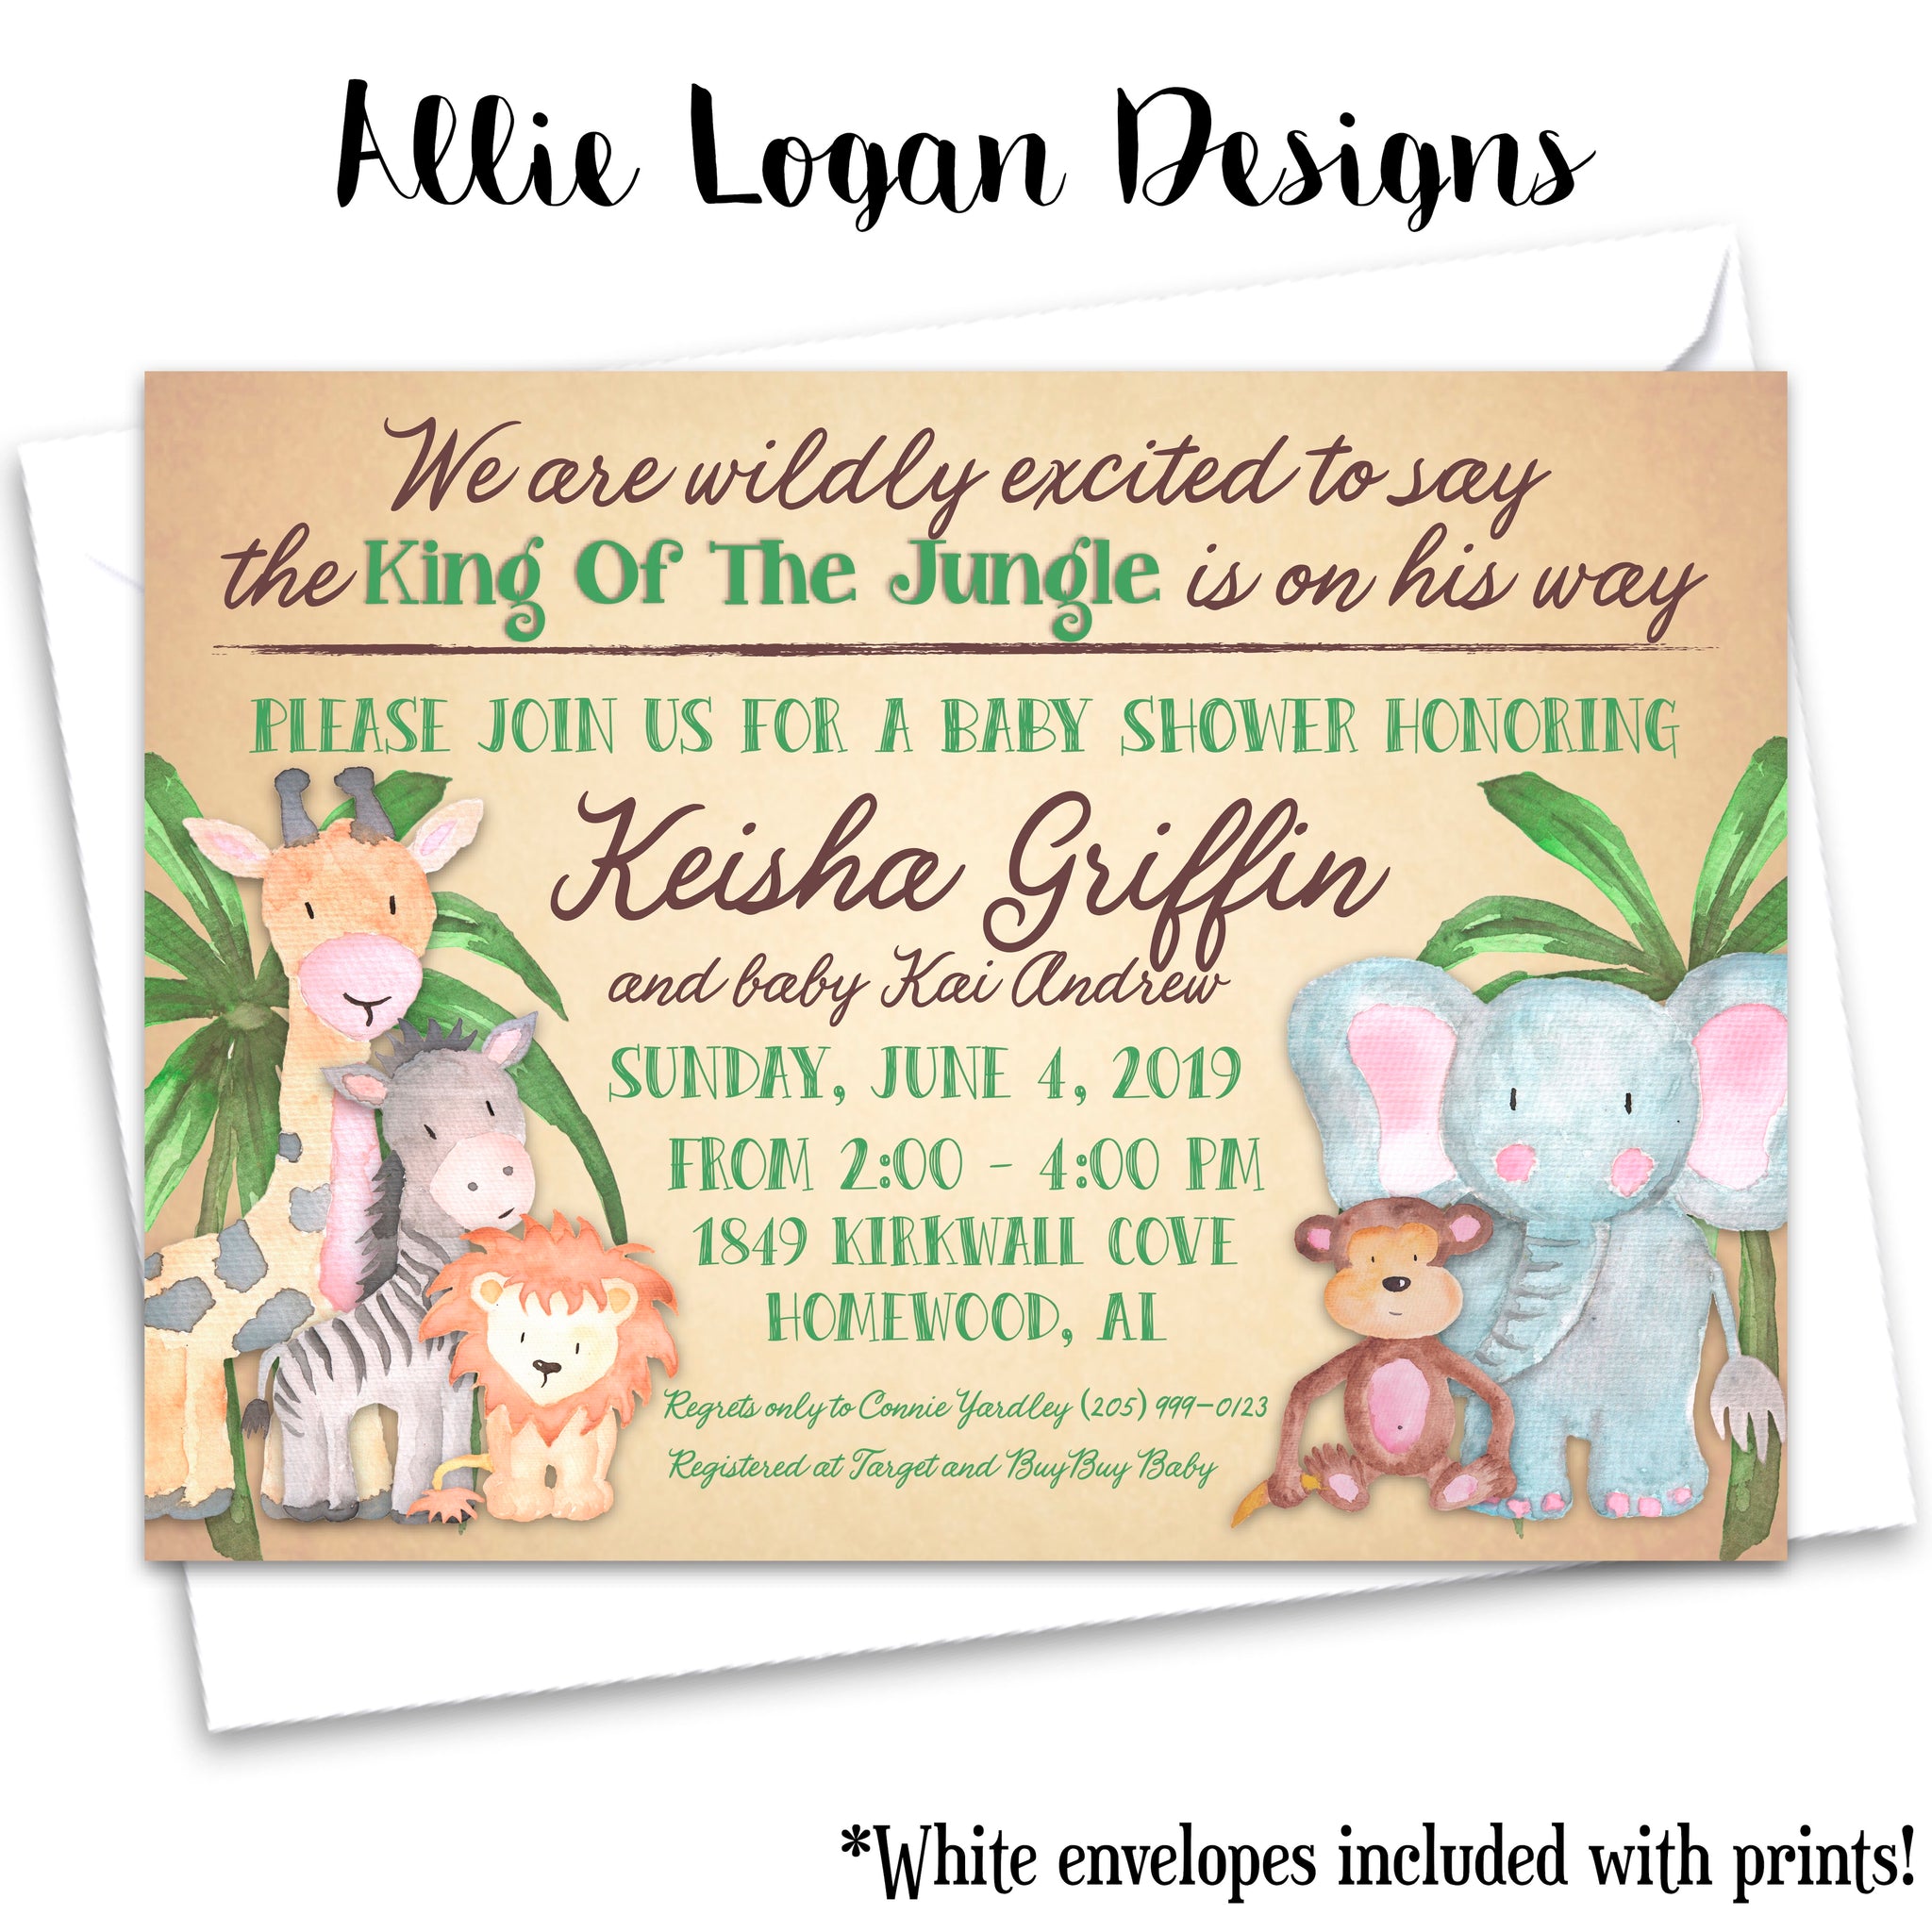 King of The Jungle Baby Shower Invitation